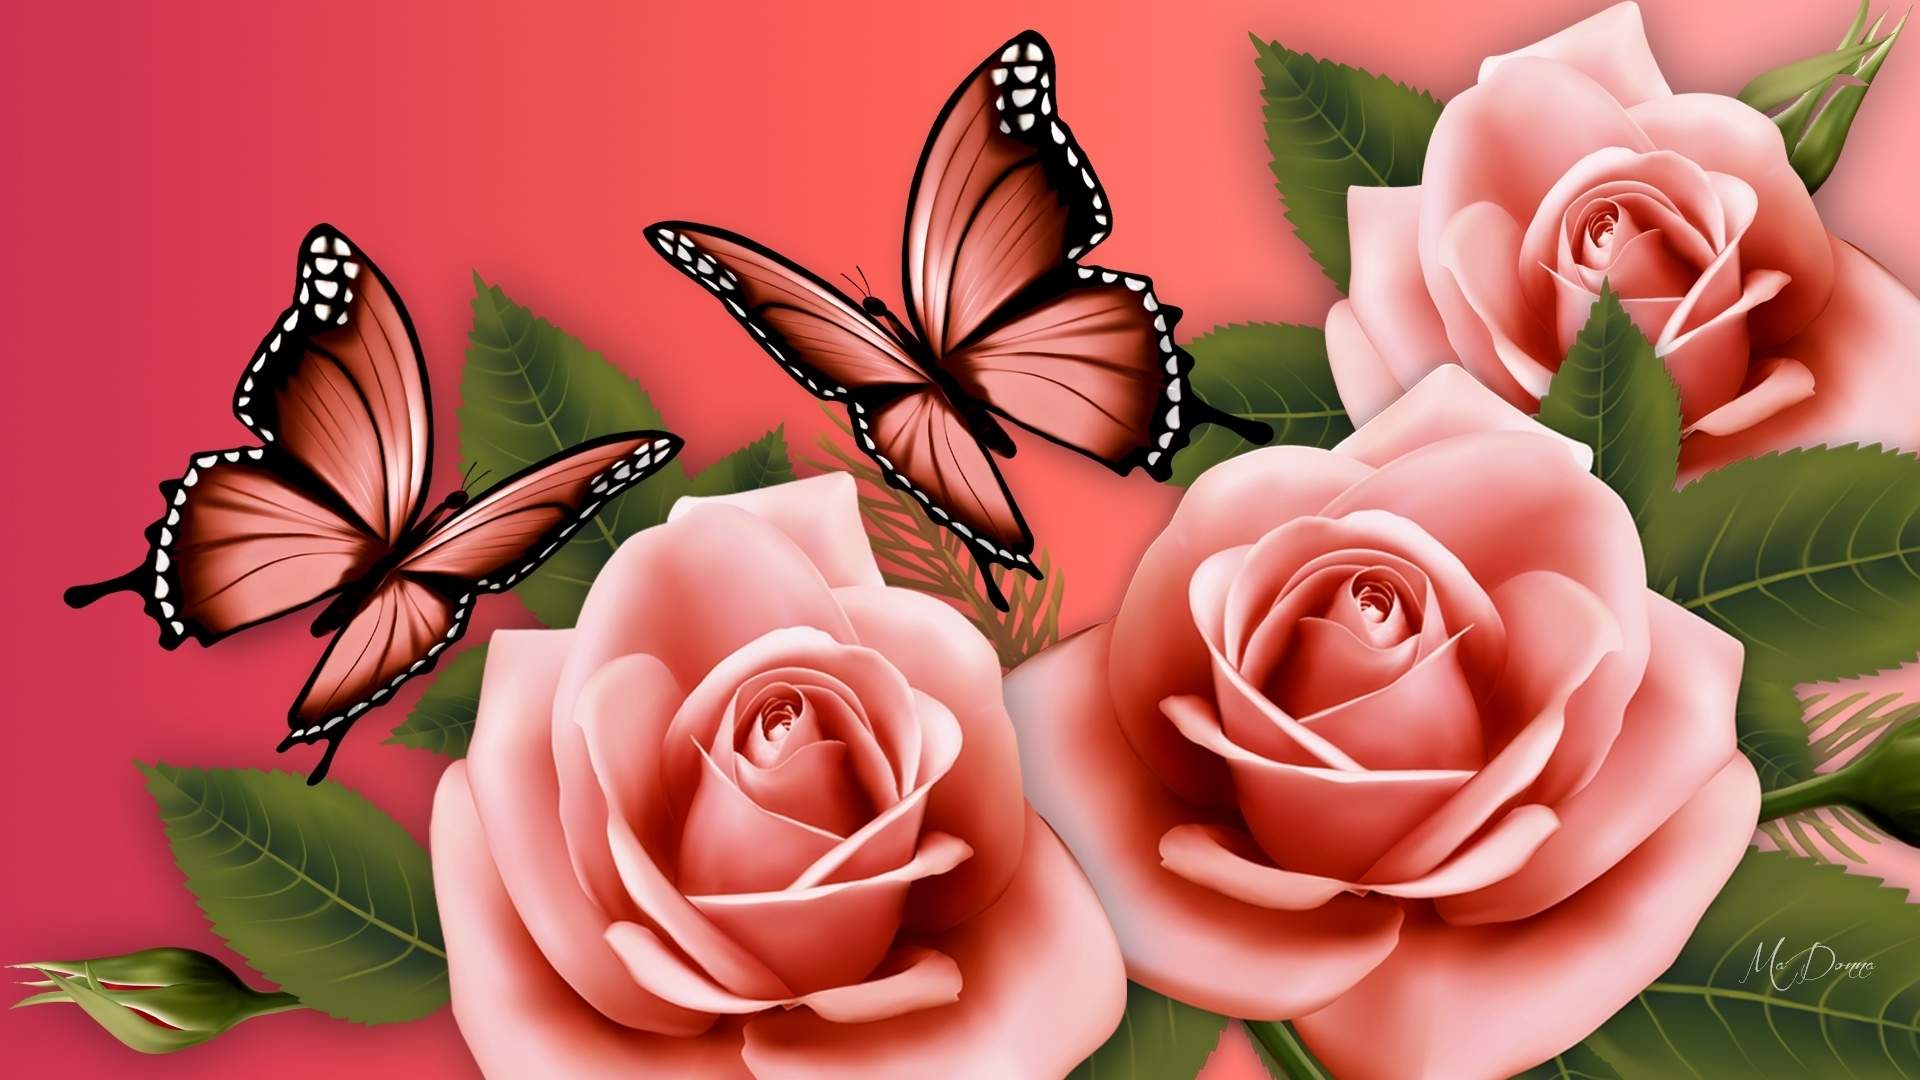 Flowers With Butterfly Wallpaper HD Flower And Butterfly